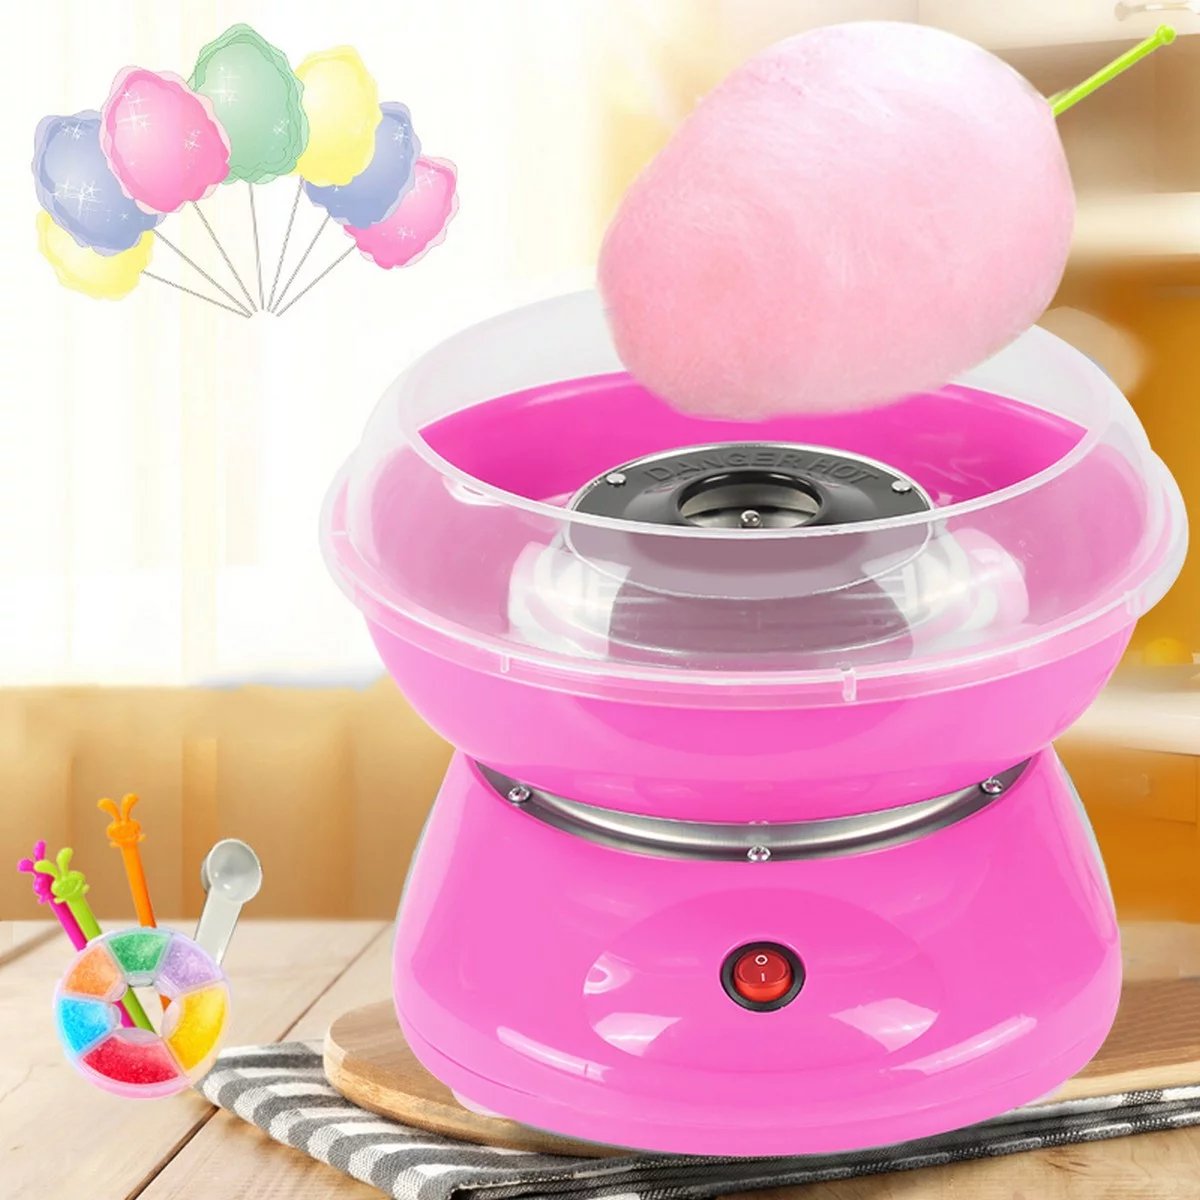 Cotton Candy Maker in Pakistan